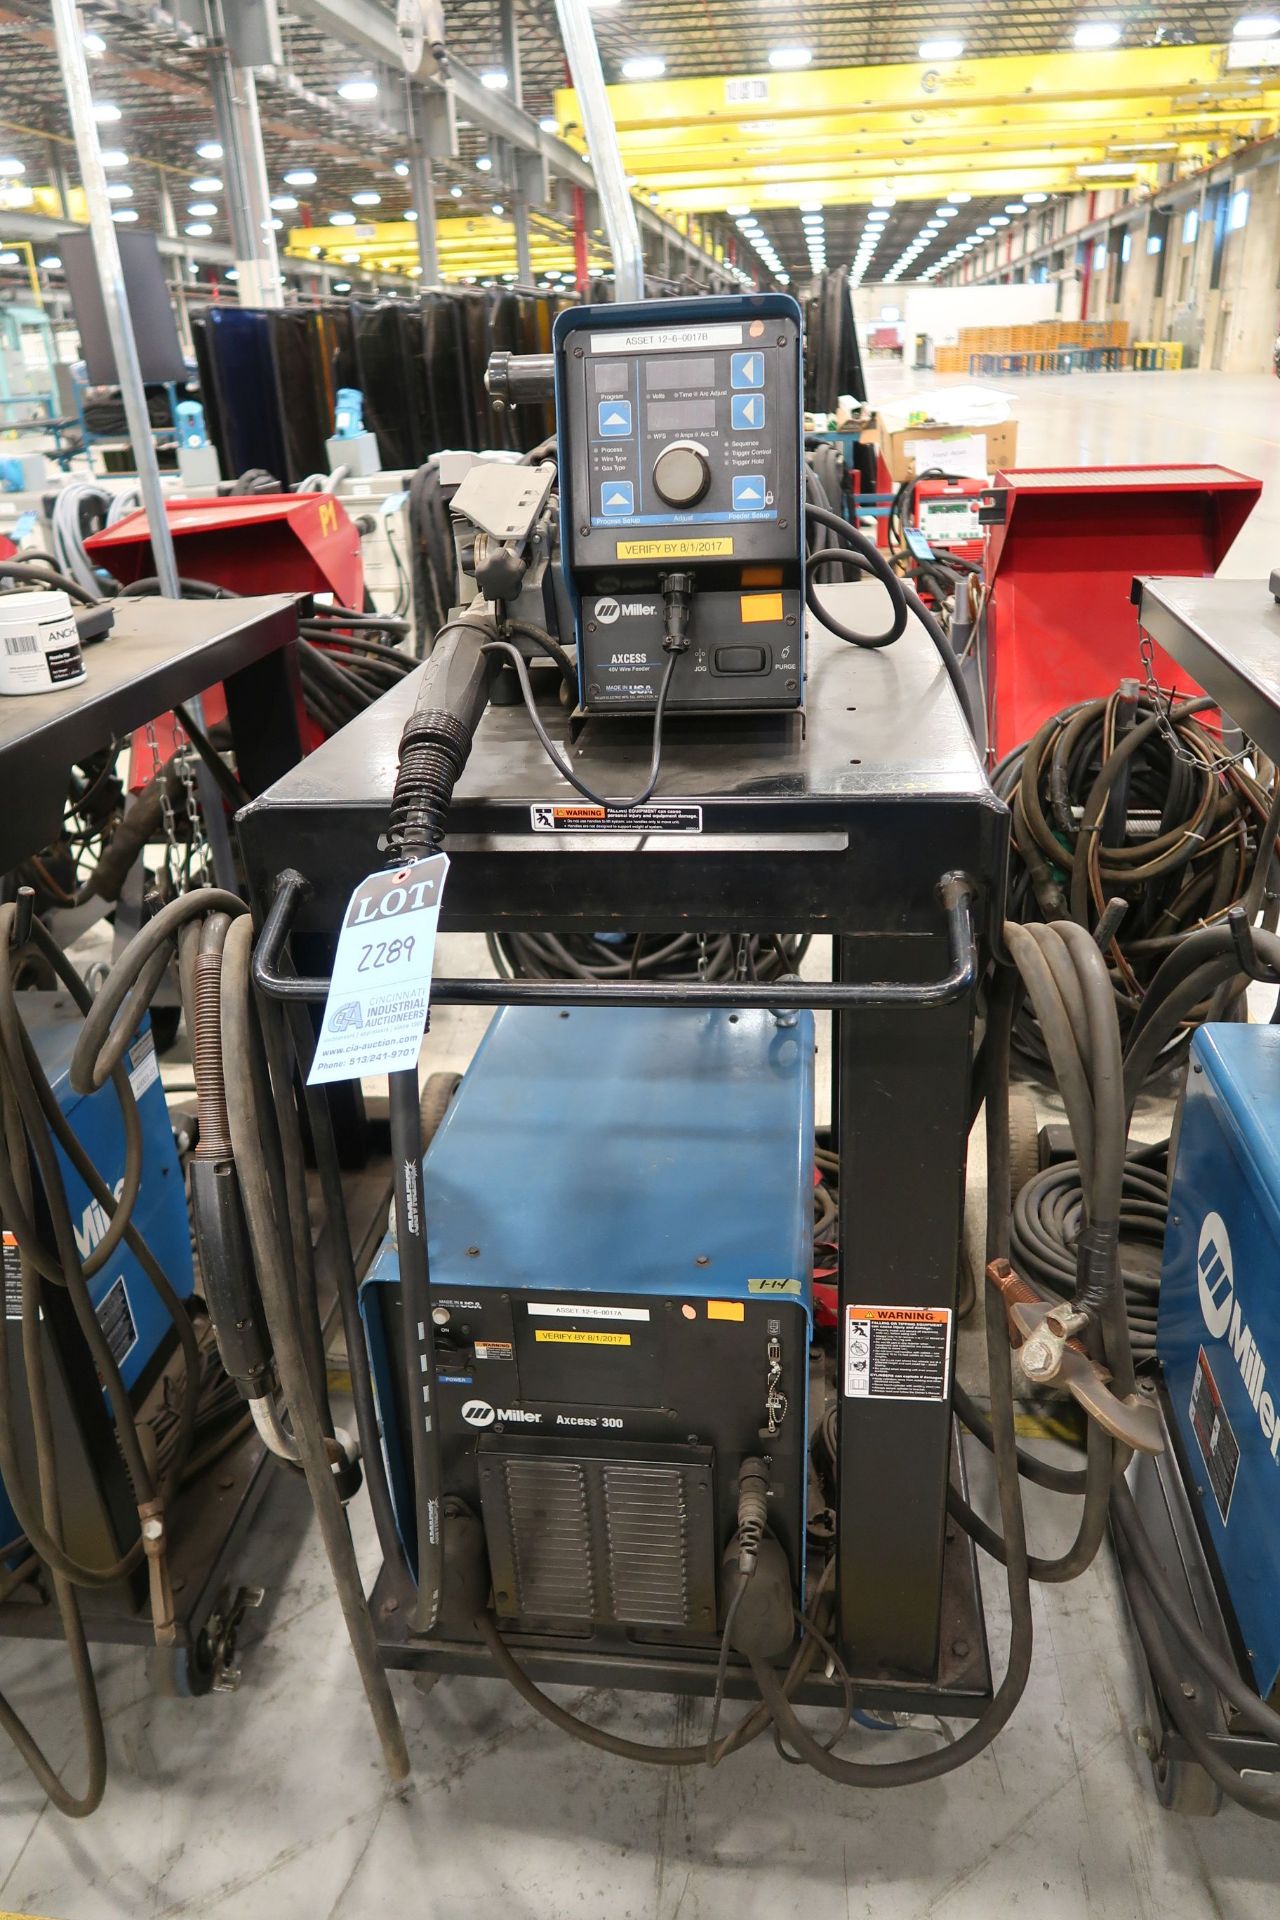 300 AMP MILLER AXCESS 300 MIG WELDER WITH MILLER AXCESS 40V WIRE FEEDER; FA 40003-12